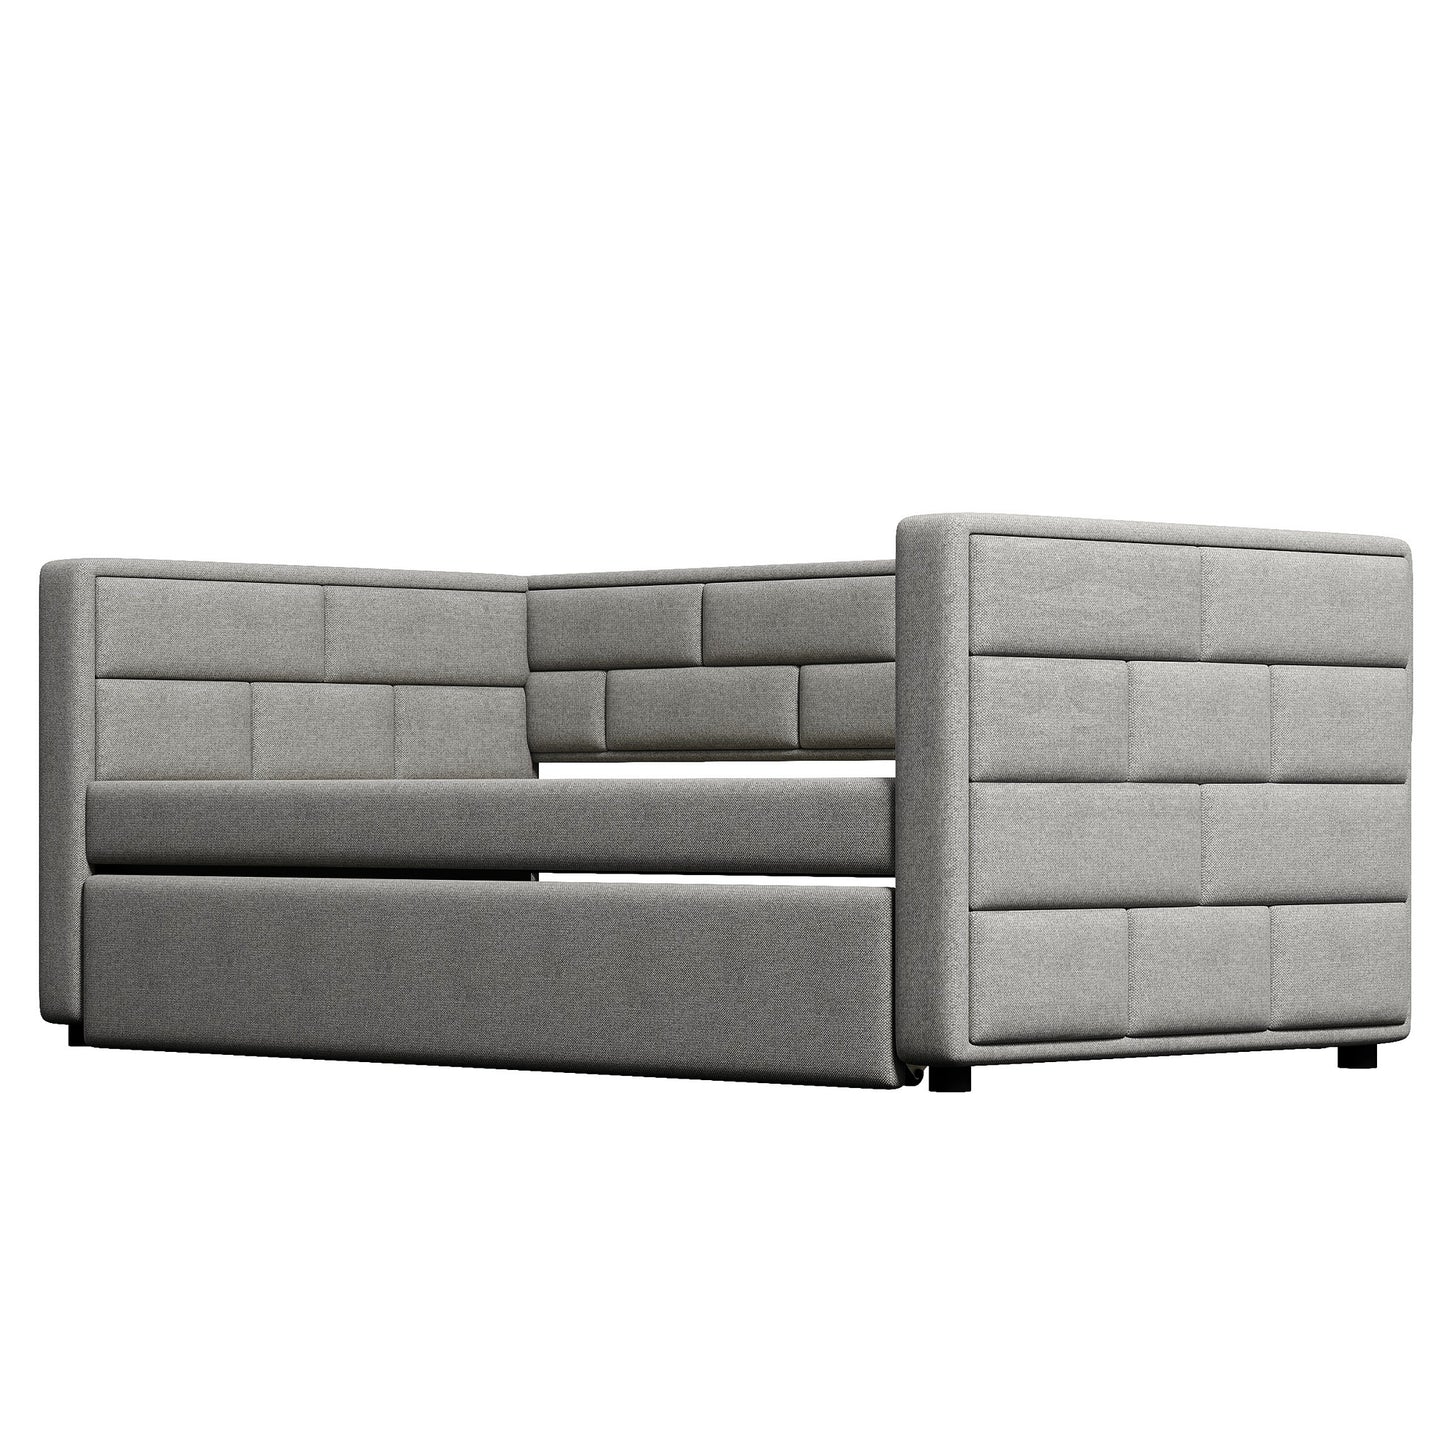 upholstered bed with padded back, gray